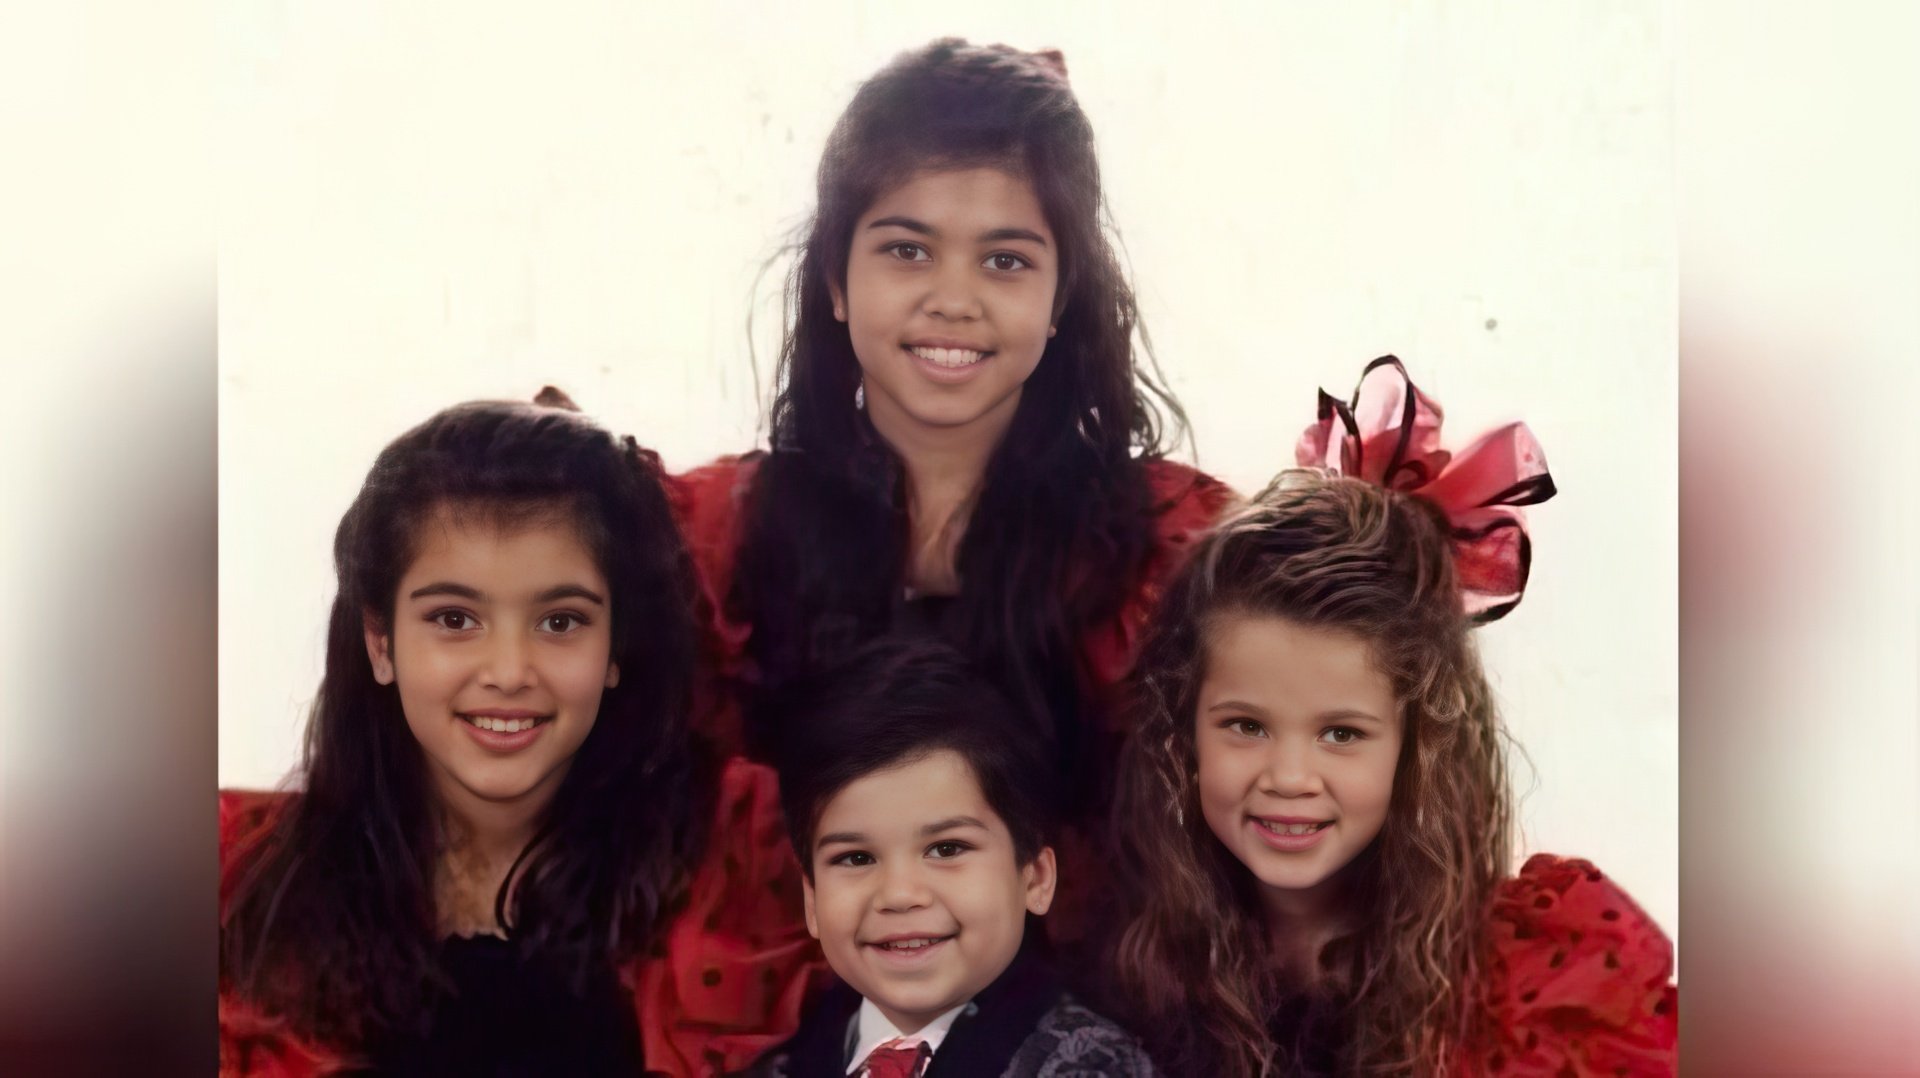 Kris and Rob’s children (Khloé is on the right)